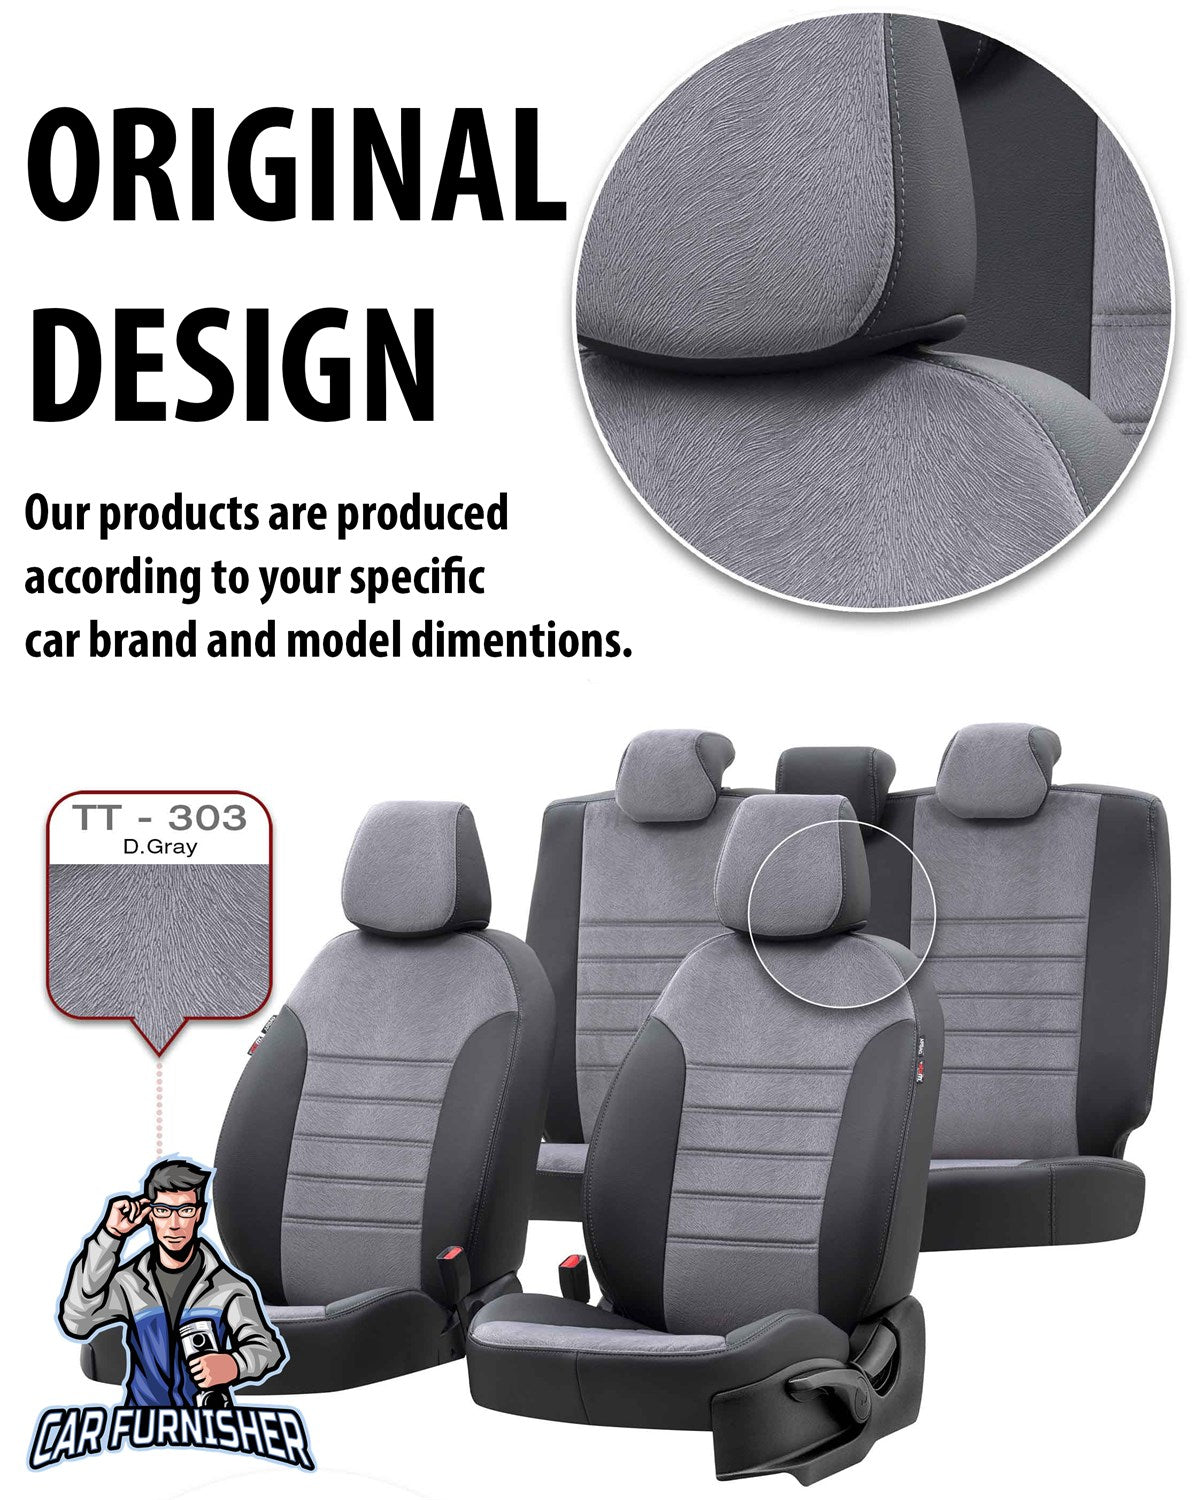 Ford Tourneo Courier Seat Covers London Foal Feather Design Smoked Black Leather & Foal Feather